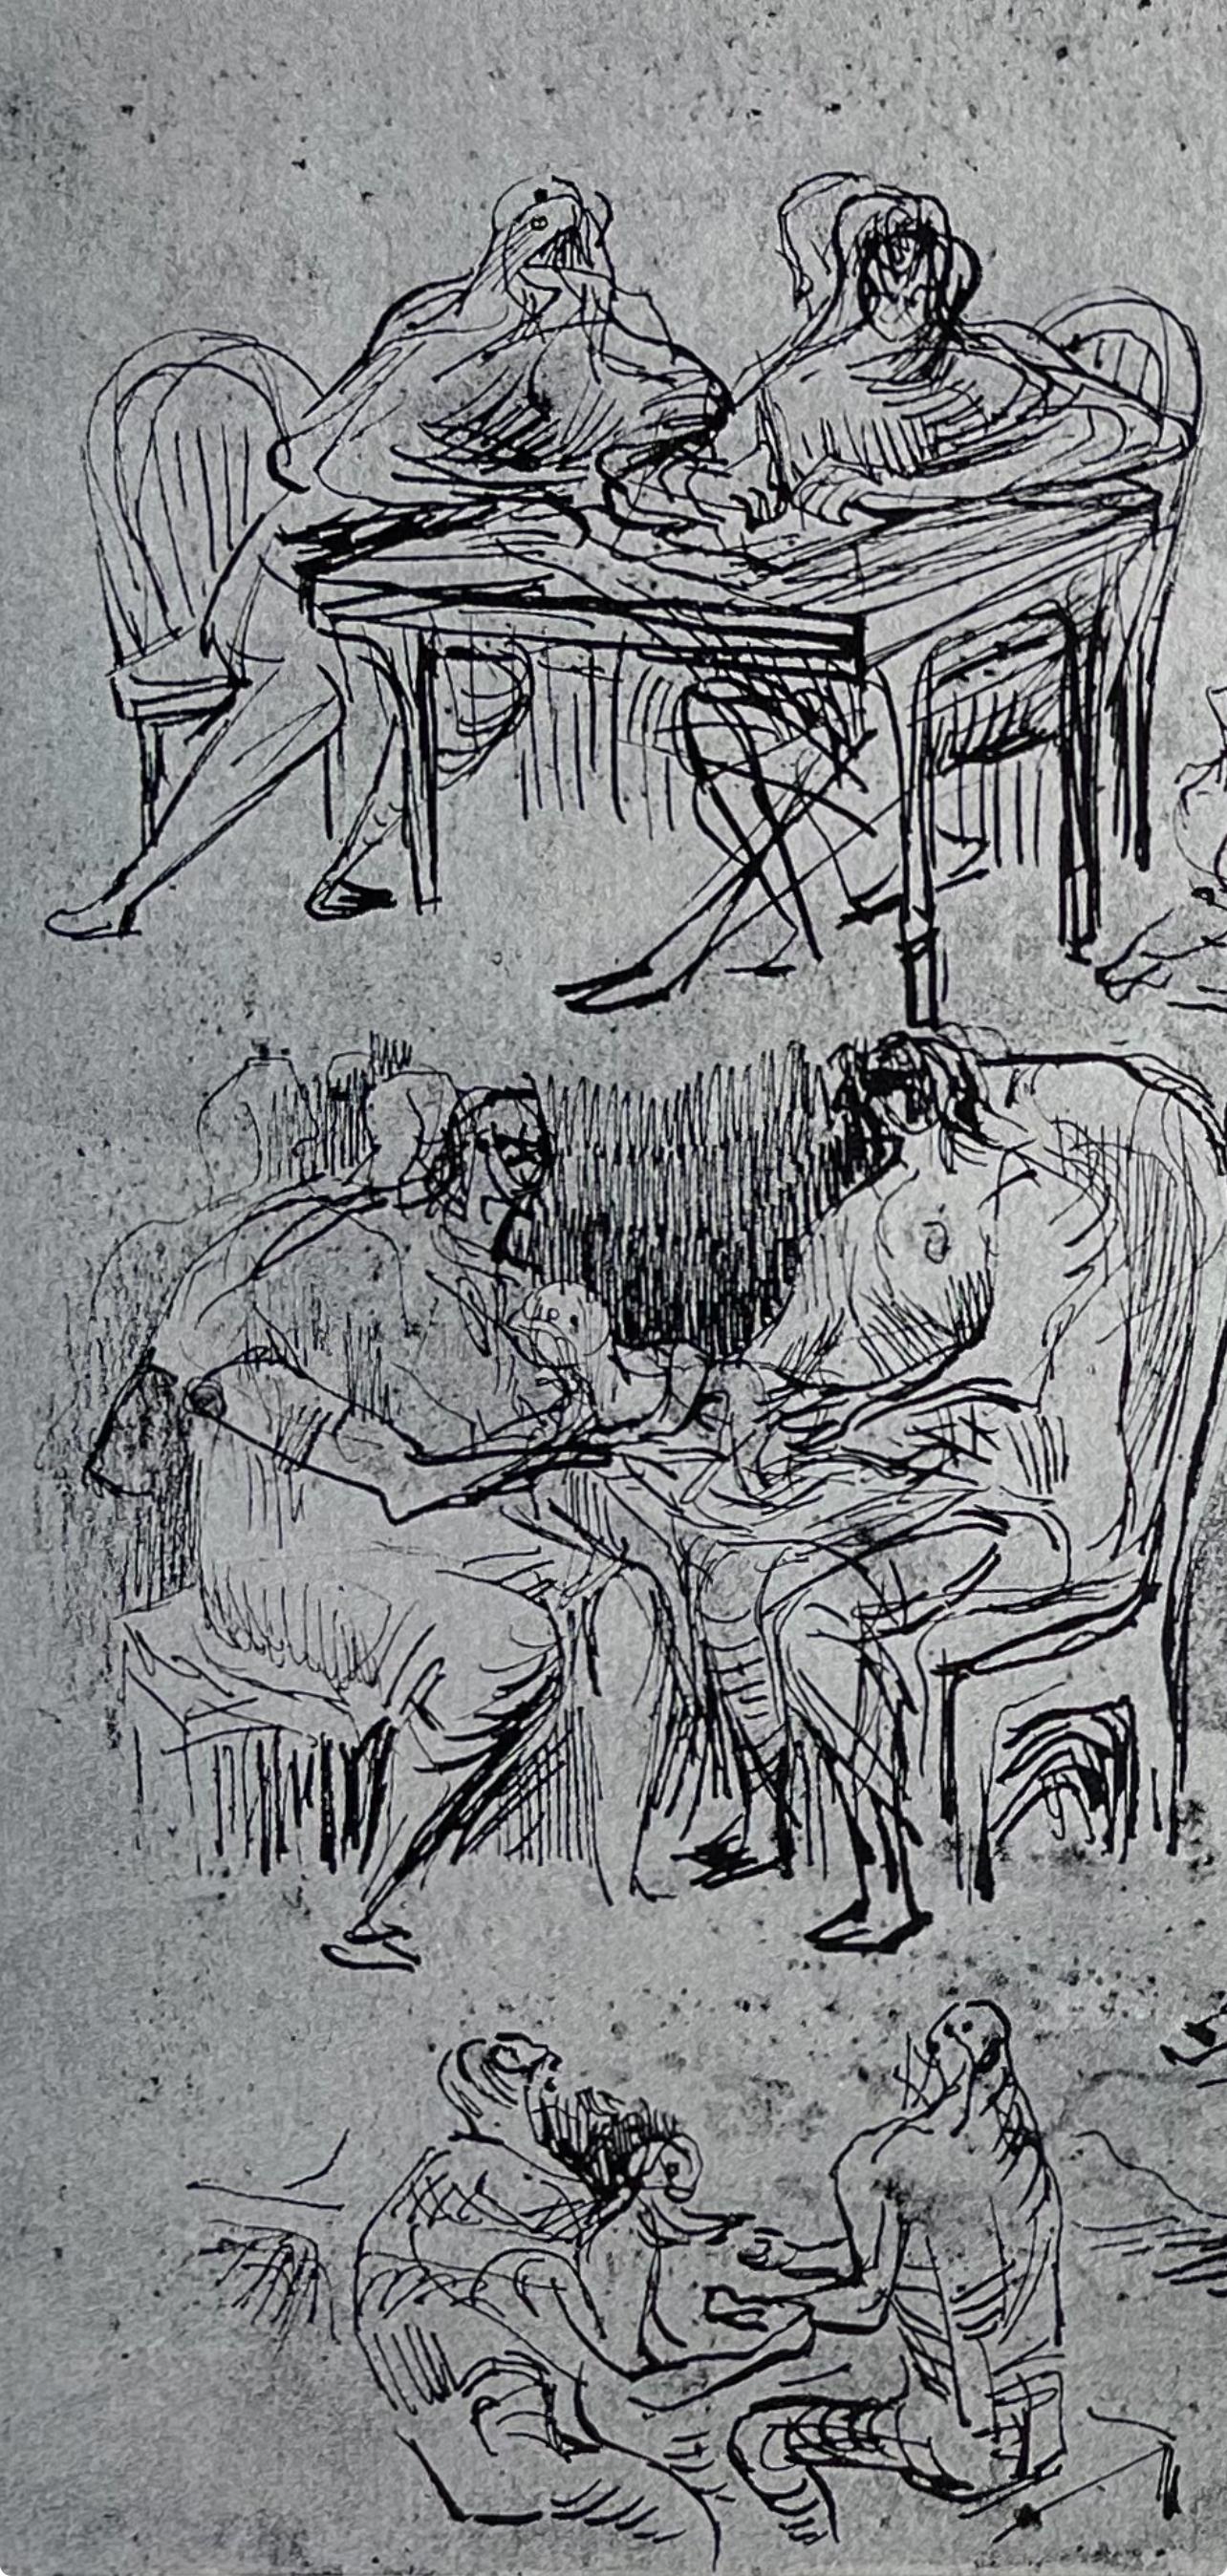 Moore, Page from Sketchbook, The Drawings of Henry Moore (after) For Sale 1